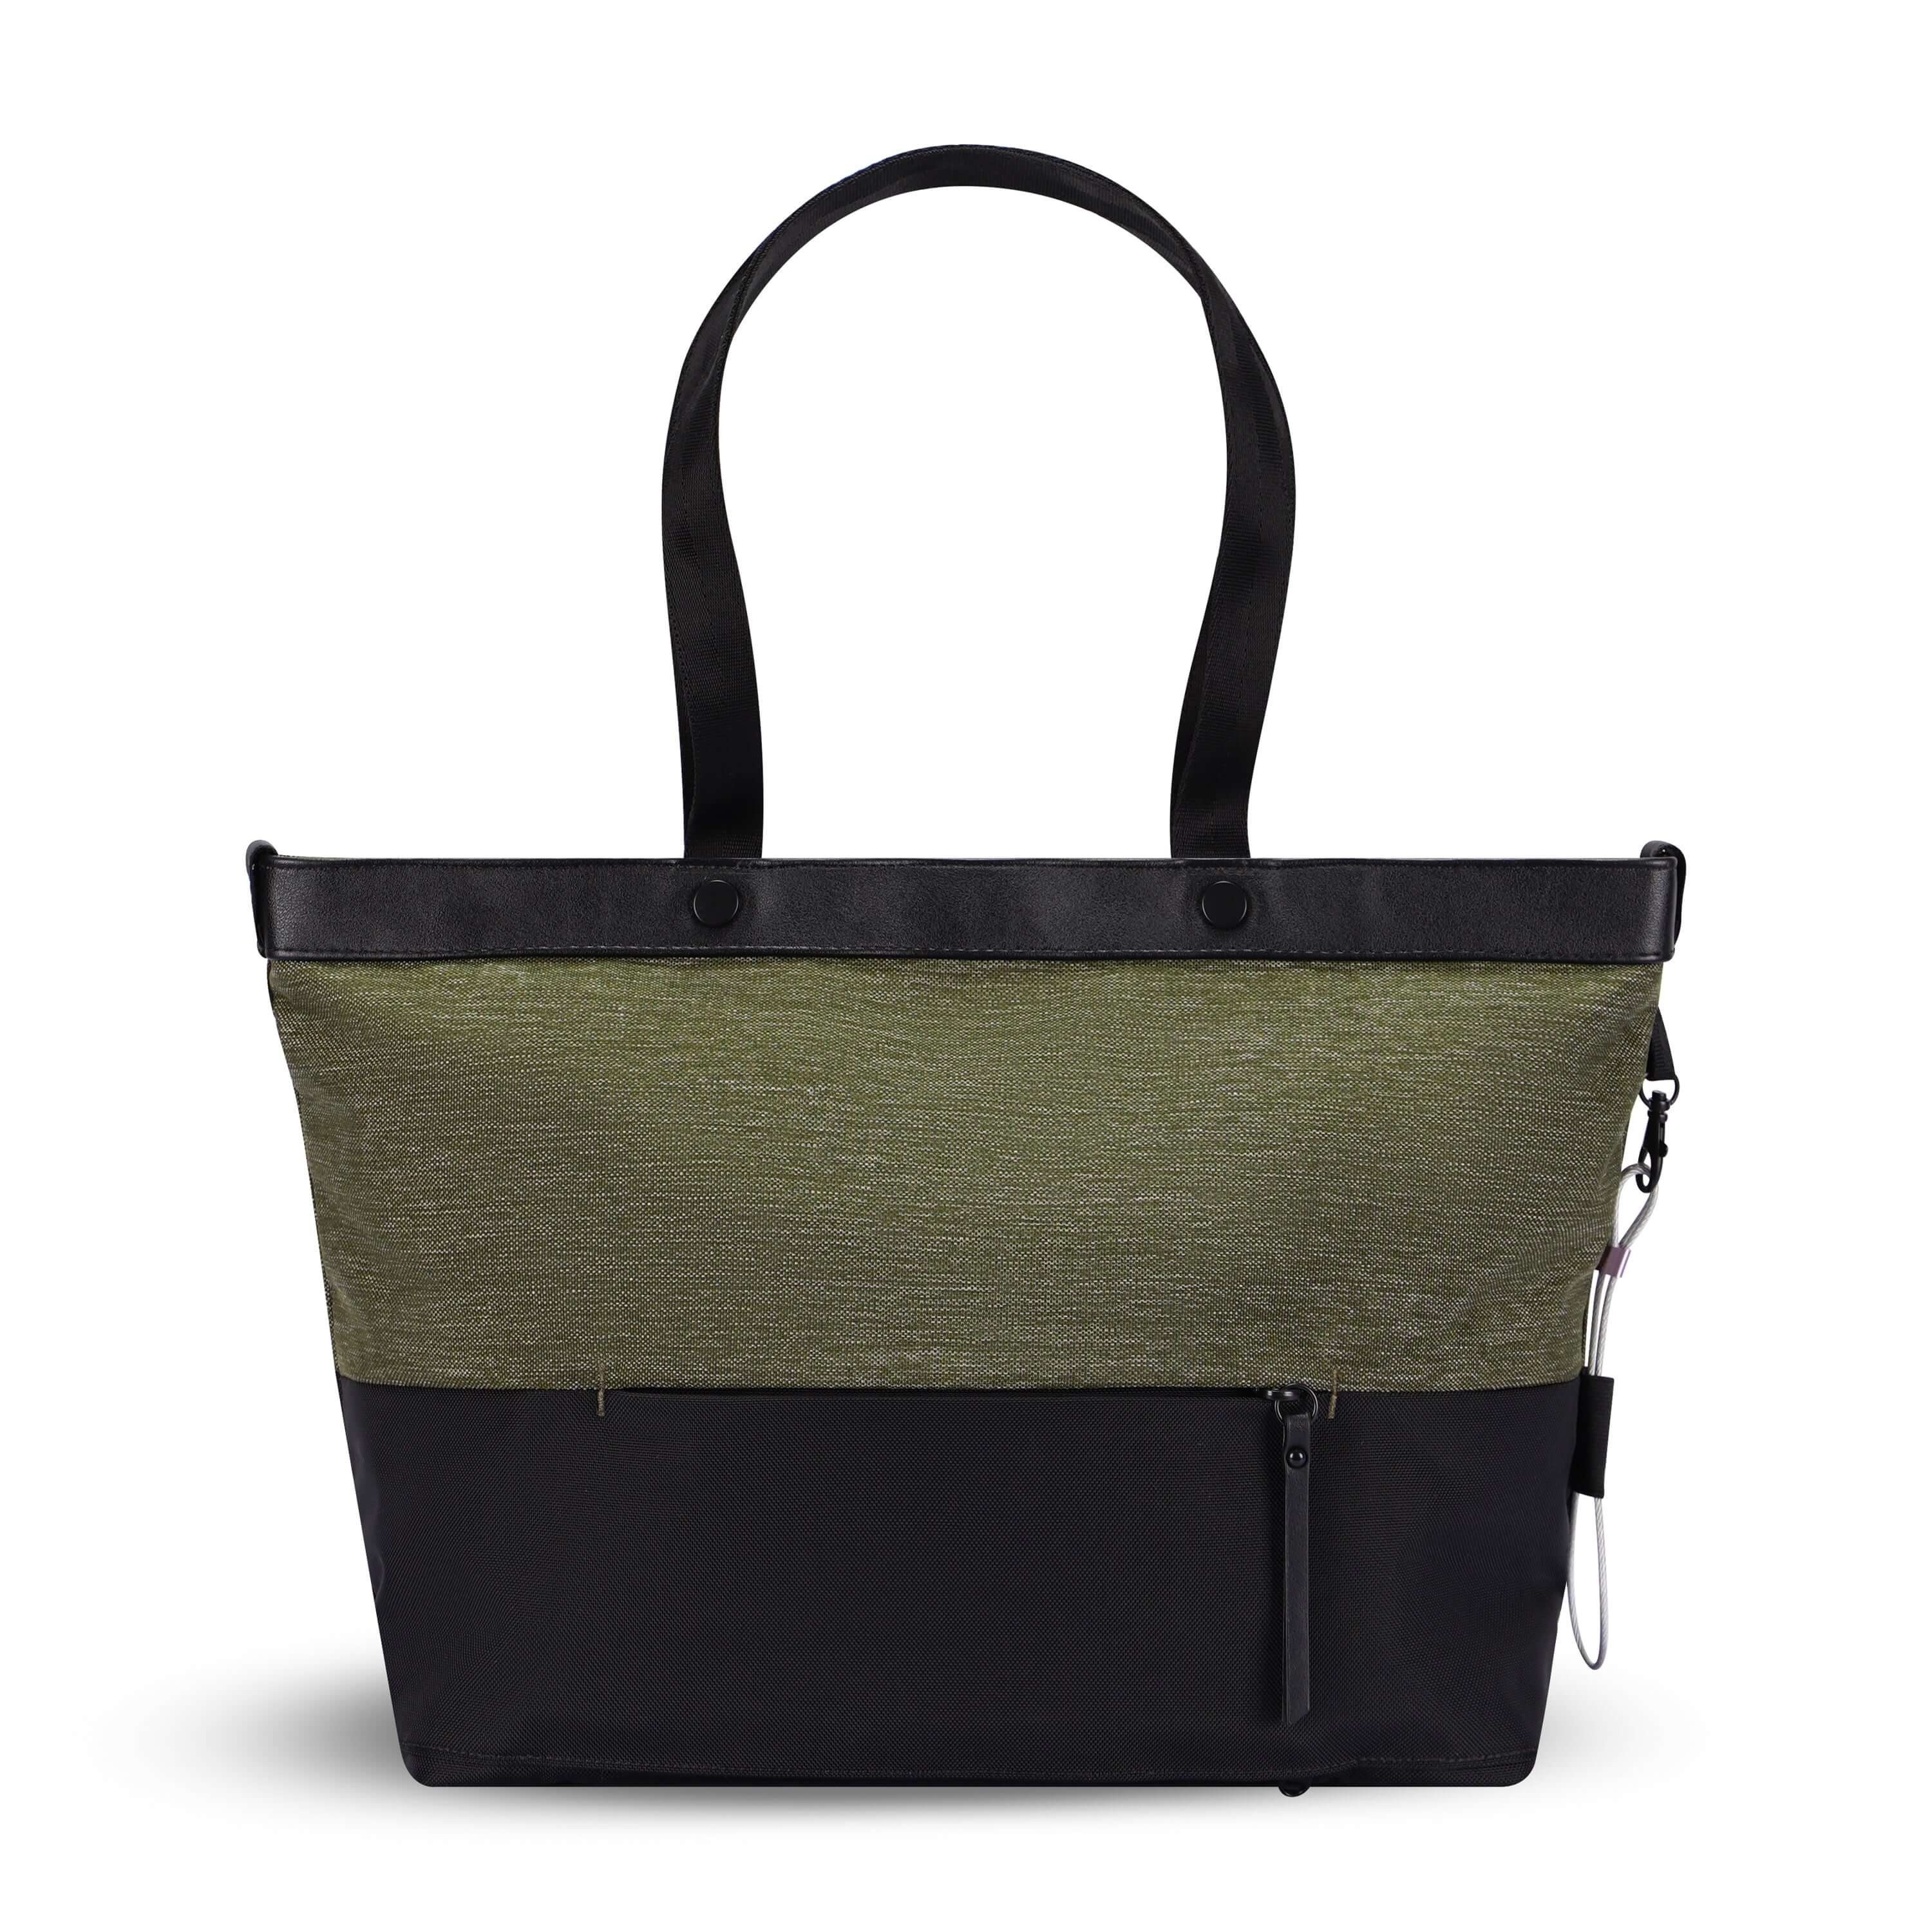 Back view of Sherpani's Anti-Theft tote, the Cali AT in Loden, with vegan leather accents in black. There is a zipper compartment that acts as a luggage pass-through or trolley sleve, and a chair loop lock on one side that is secured by an elastic tab. 